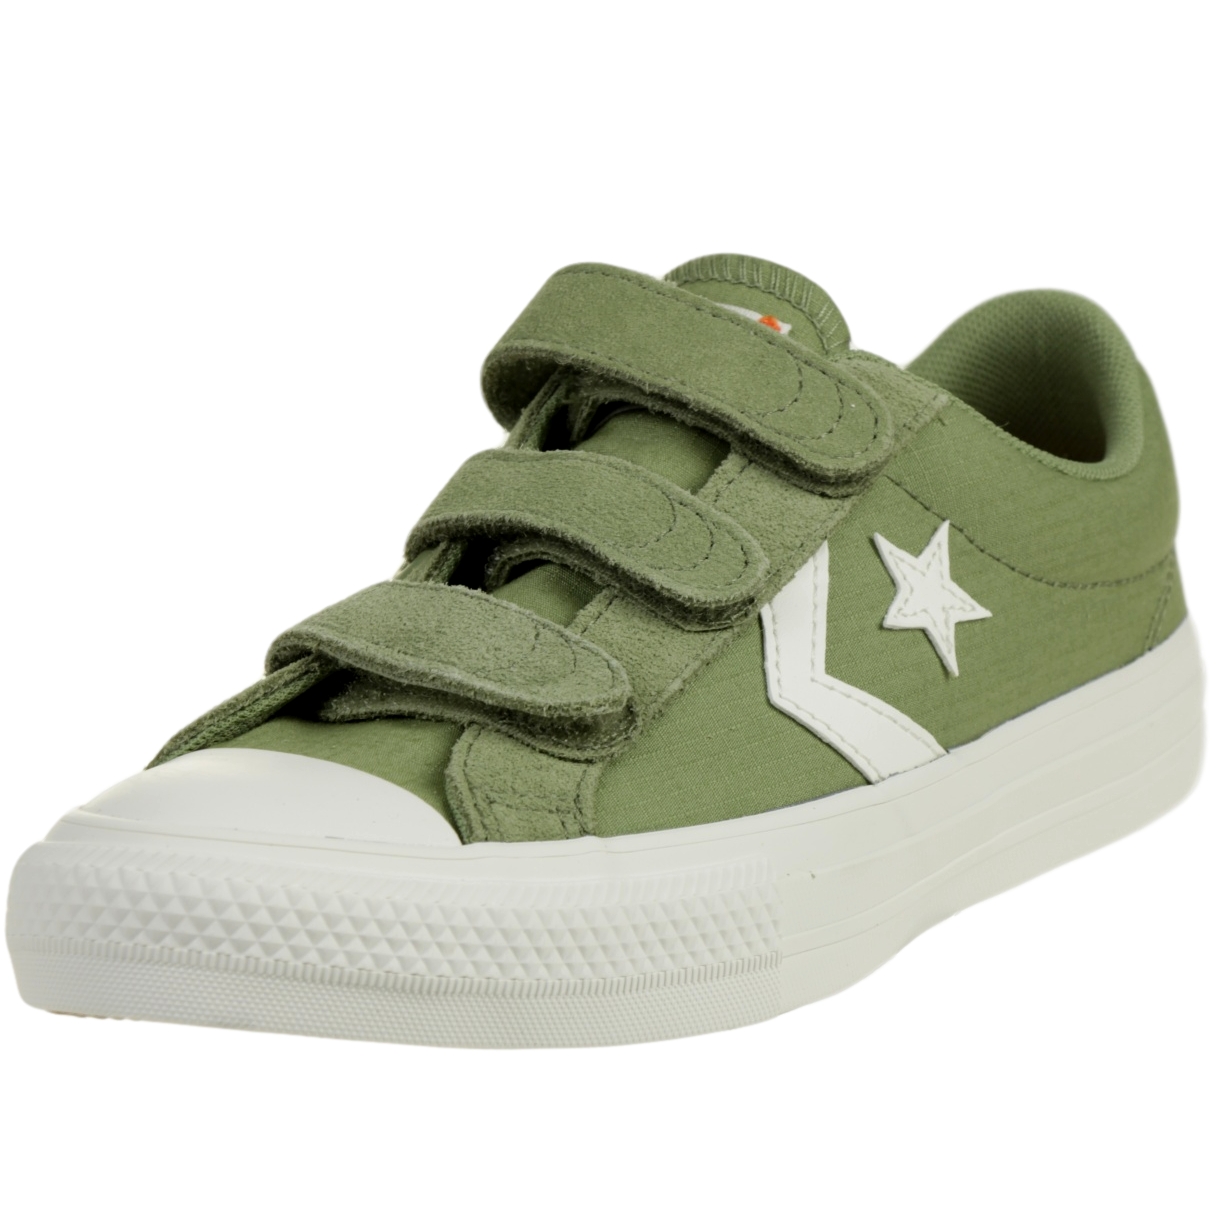 Converse CTAS 3V OX Easy-On Star Player Low Top Kinder Sneaker 667545C Grün